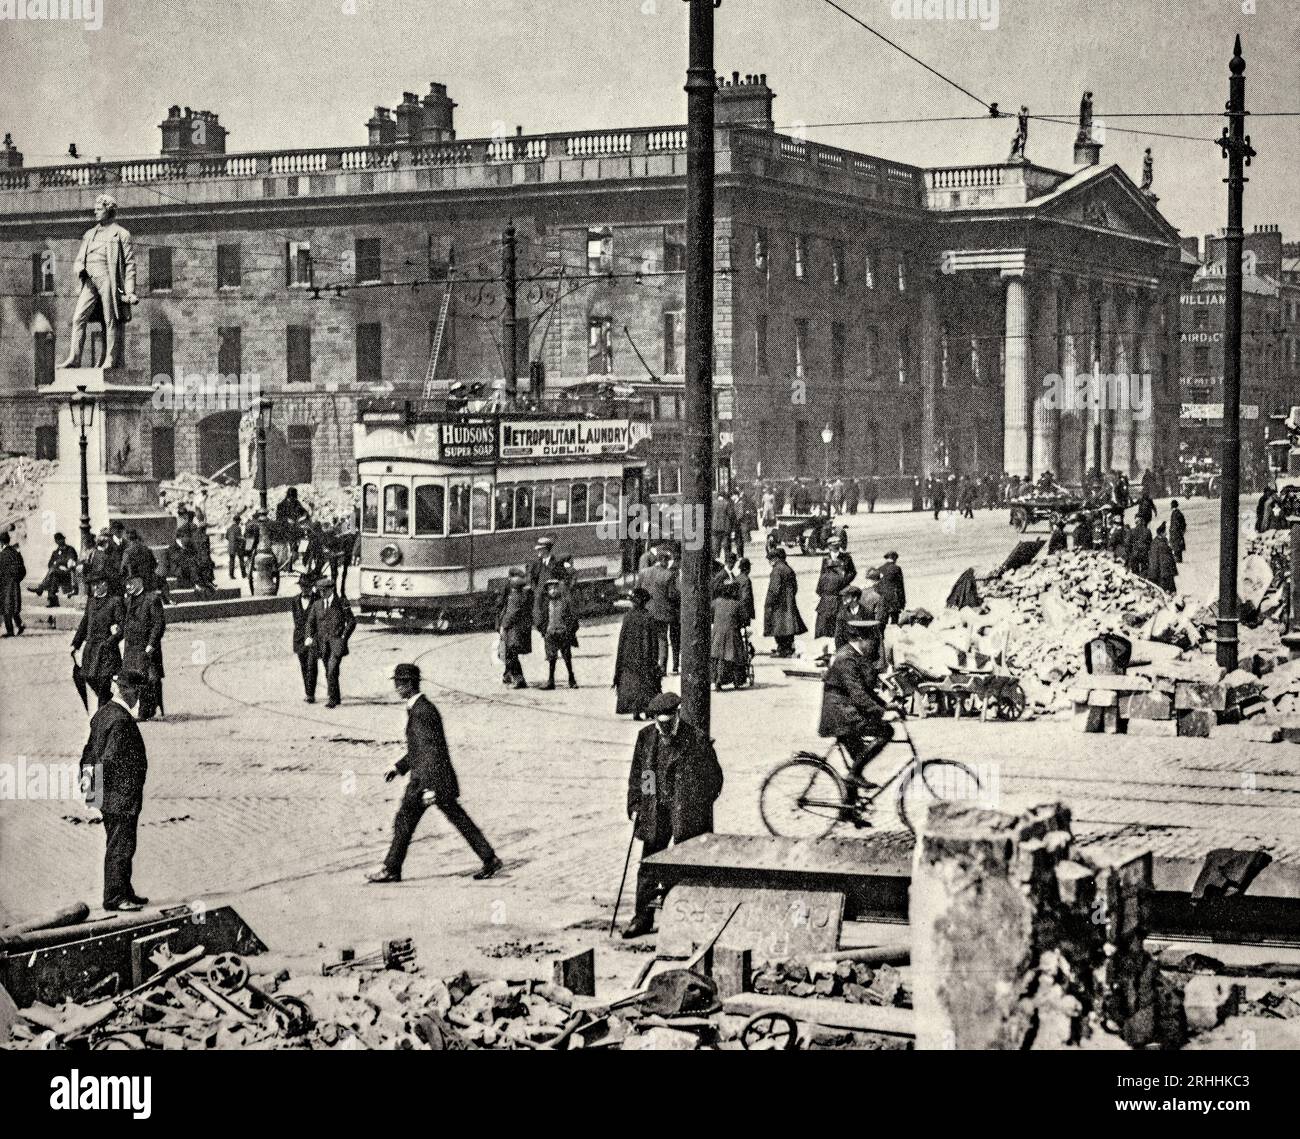 An early 20th century photograph of ruined General Post Office (GPO) in Dublin's O'Connell Street (then Sackville Street) following the Easter Rising of 1916. The GPO served as the headquarters of the uprising's leaders and it was from outside this building on the 24th of April 1916, that Patrick Pearse read out the Proclamation of the Irish Republic. The building was destroyed by fire in the course of the rebellion, save for the granite facade, and not rebuilt until 1929, by the Irish Free State government. Stock Photo